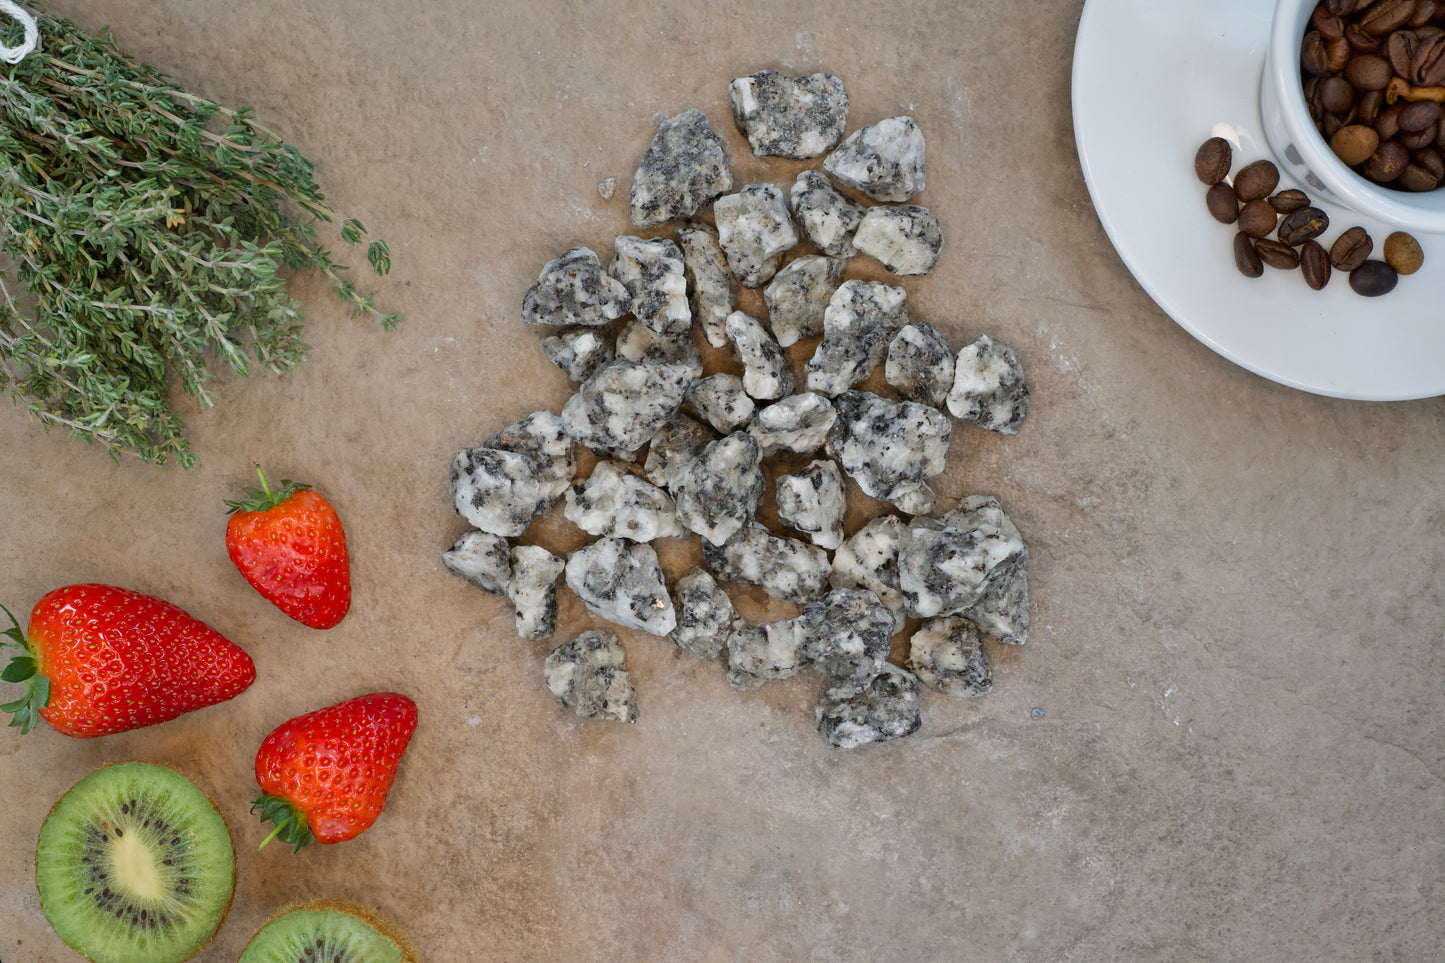 A collection of small, gray, rocky stones, resembling Brisks 20mm Black and White Granite Chippings, are centrally placed on a beige surface. Surrounding the stones are a sprig of thyme, a few strawberries, a slice of kiwi, and a white saucer containing coffee beans. The scene seems to depict various natural elements.